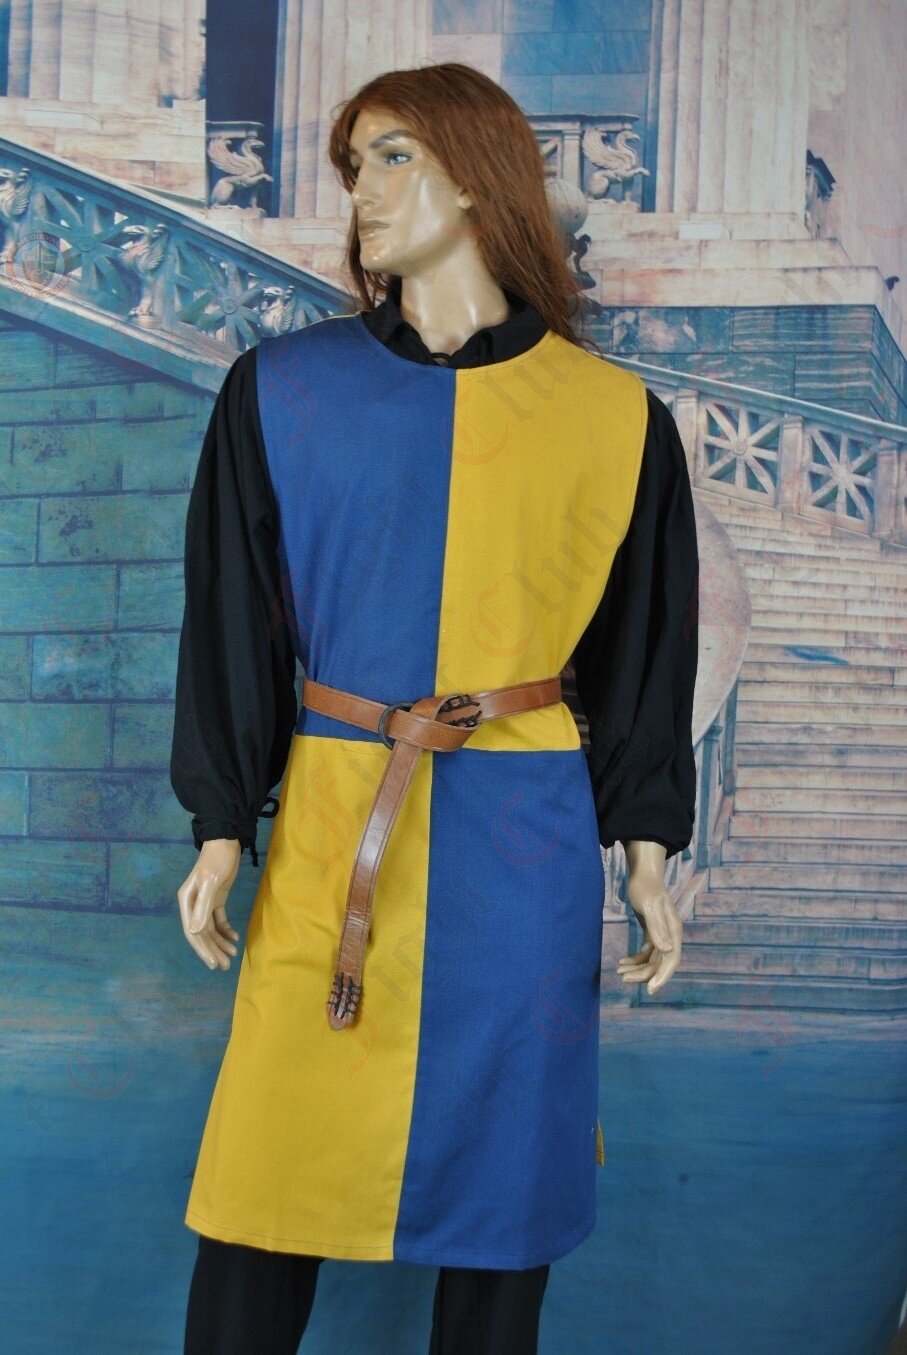 Medieval quartered surcoat tabard tunic for medieval costume.